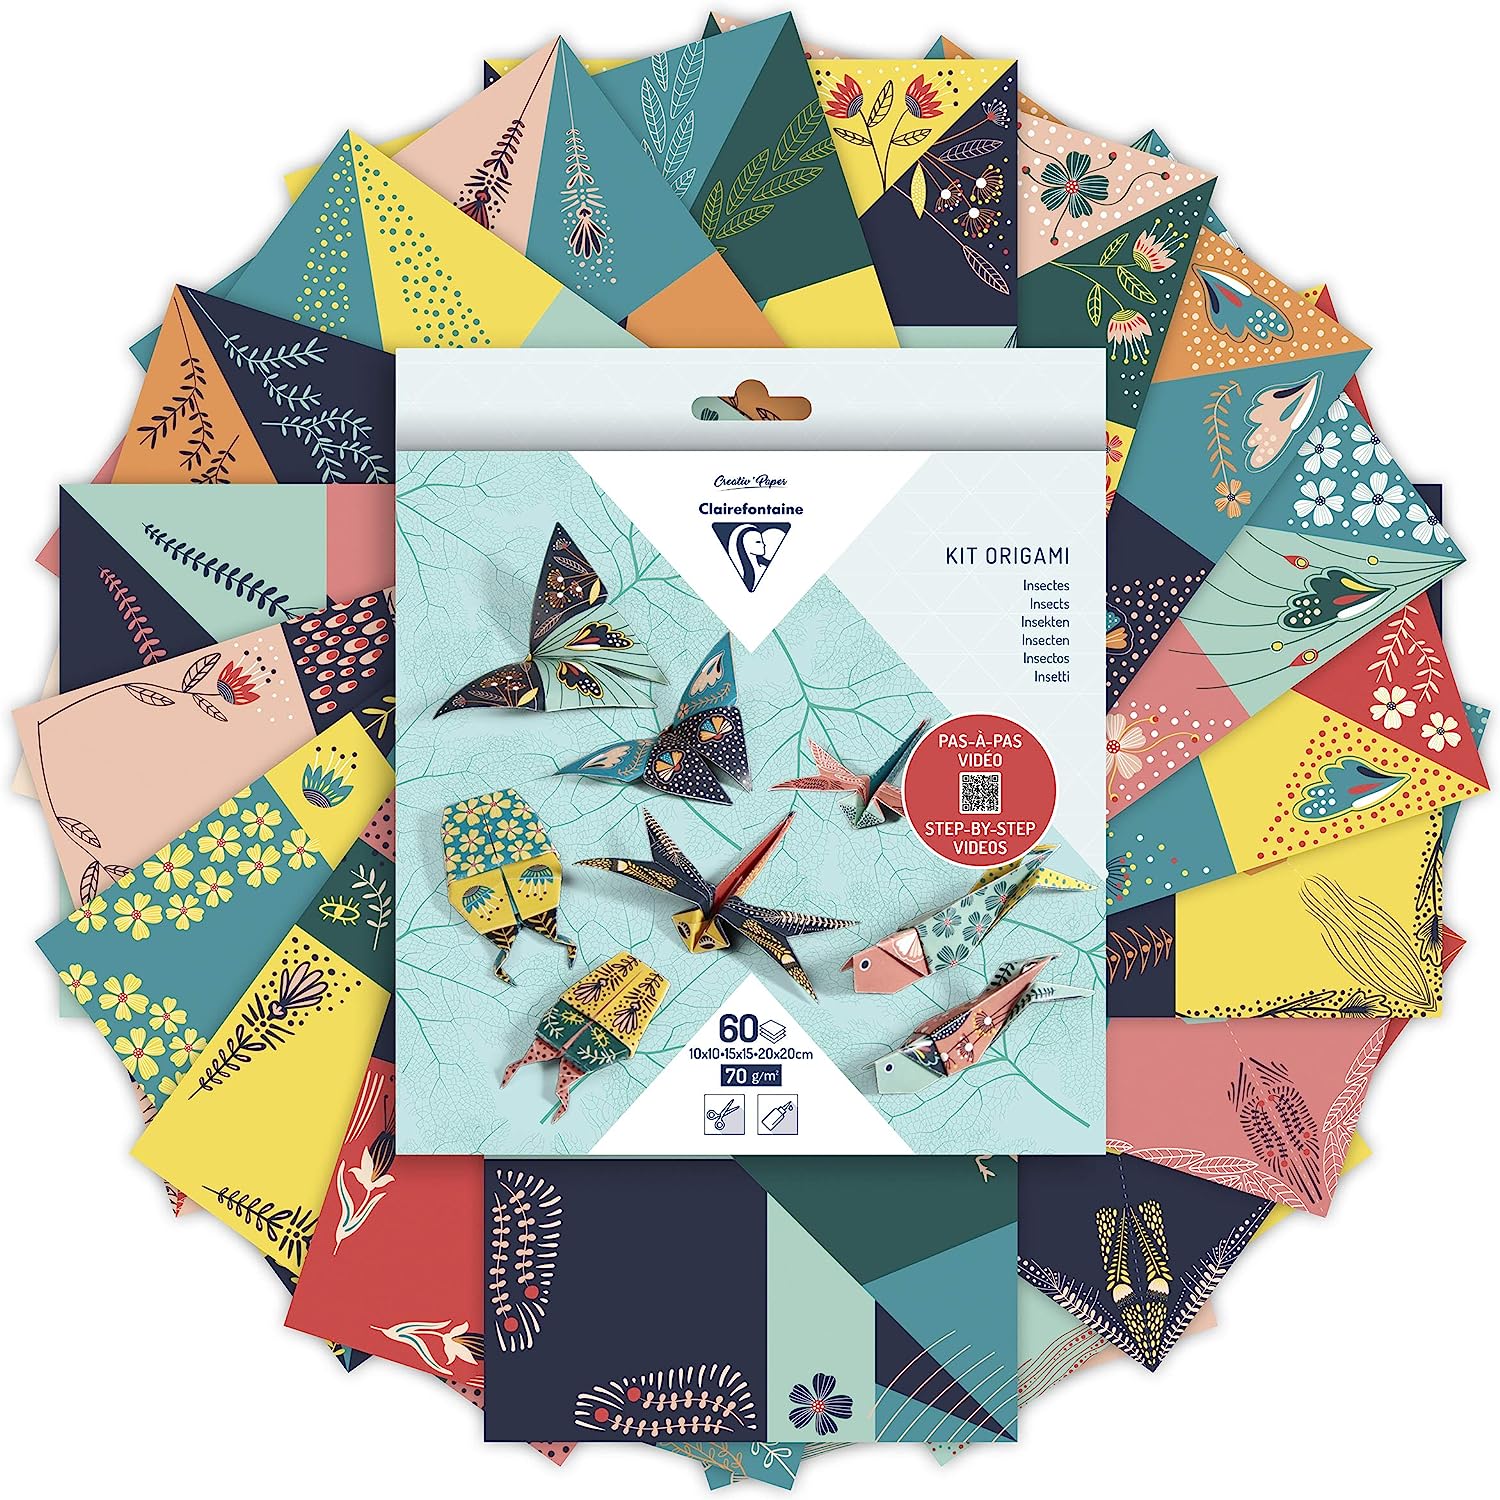 Clairefontaine origami insects kit